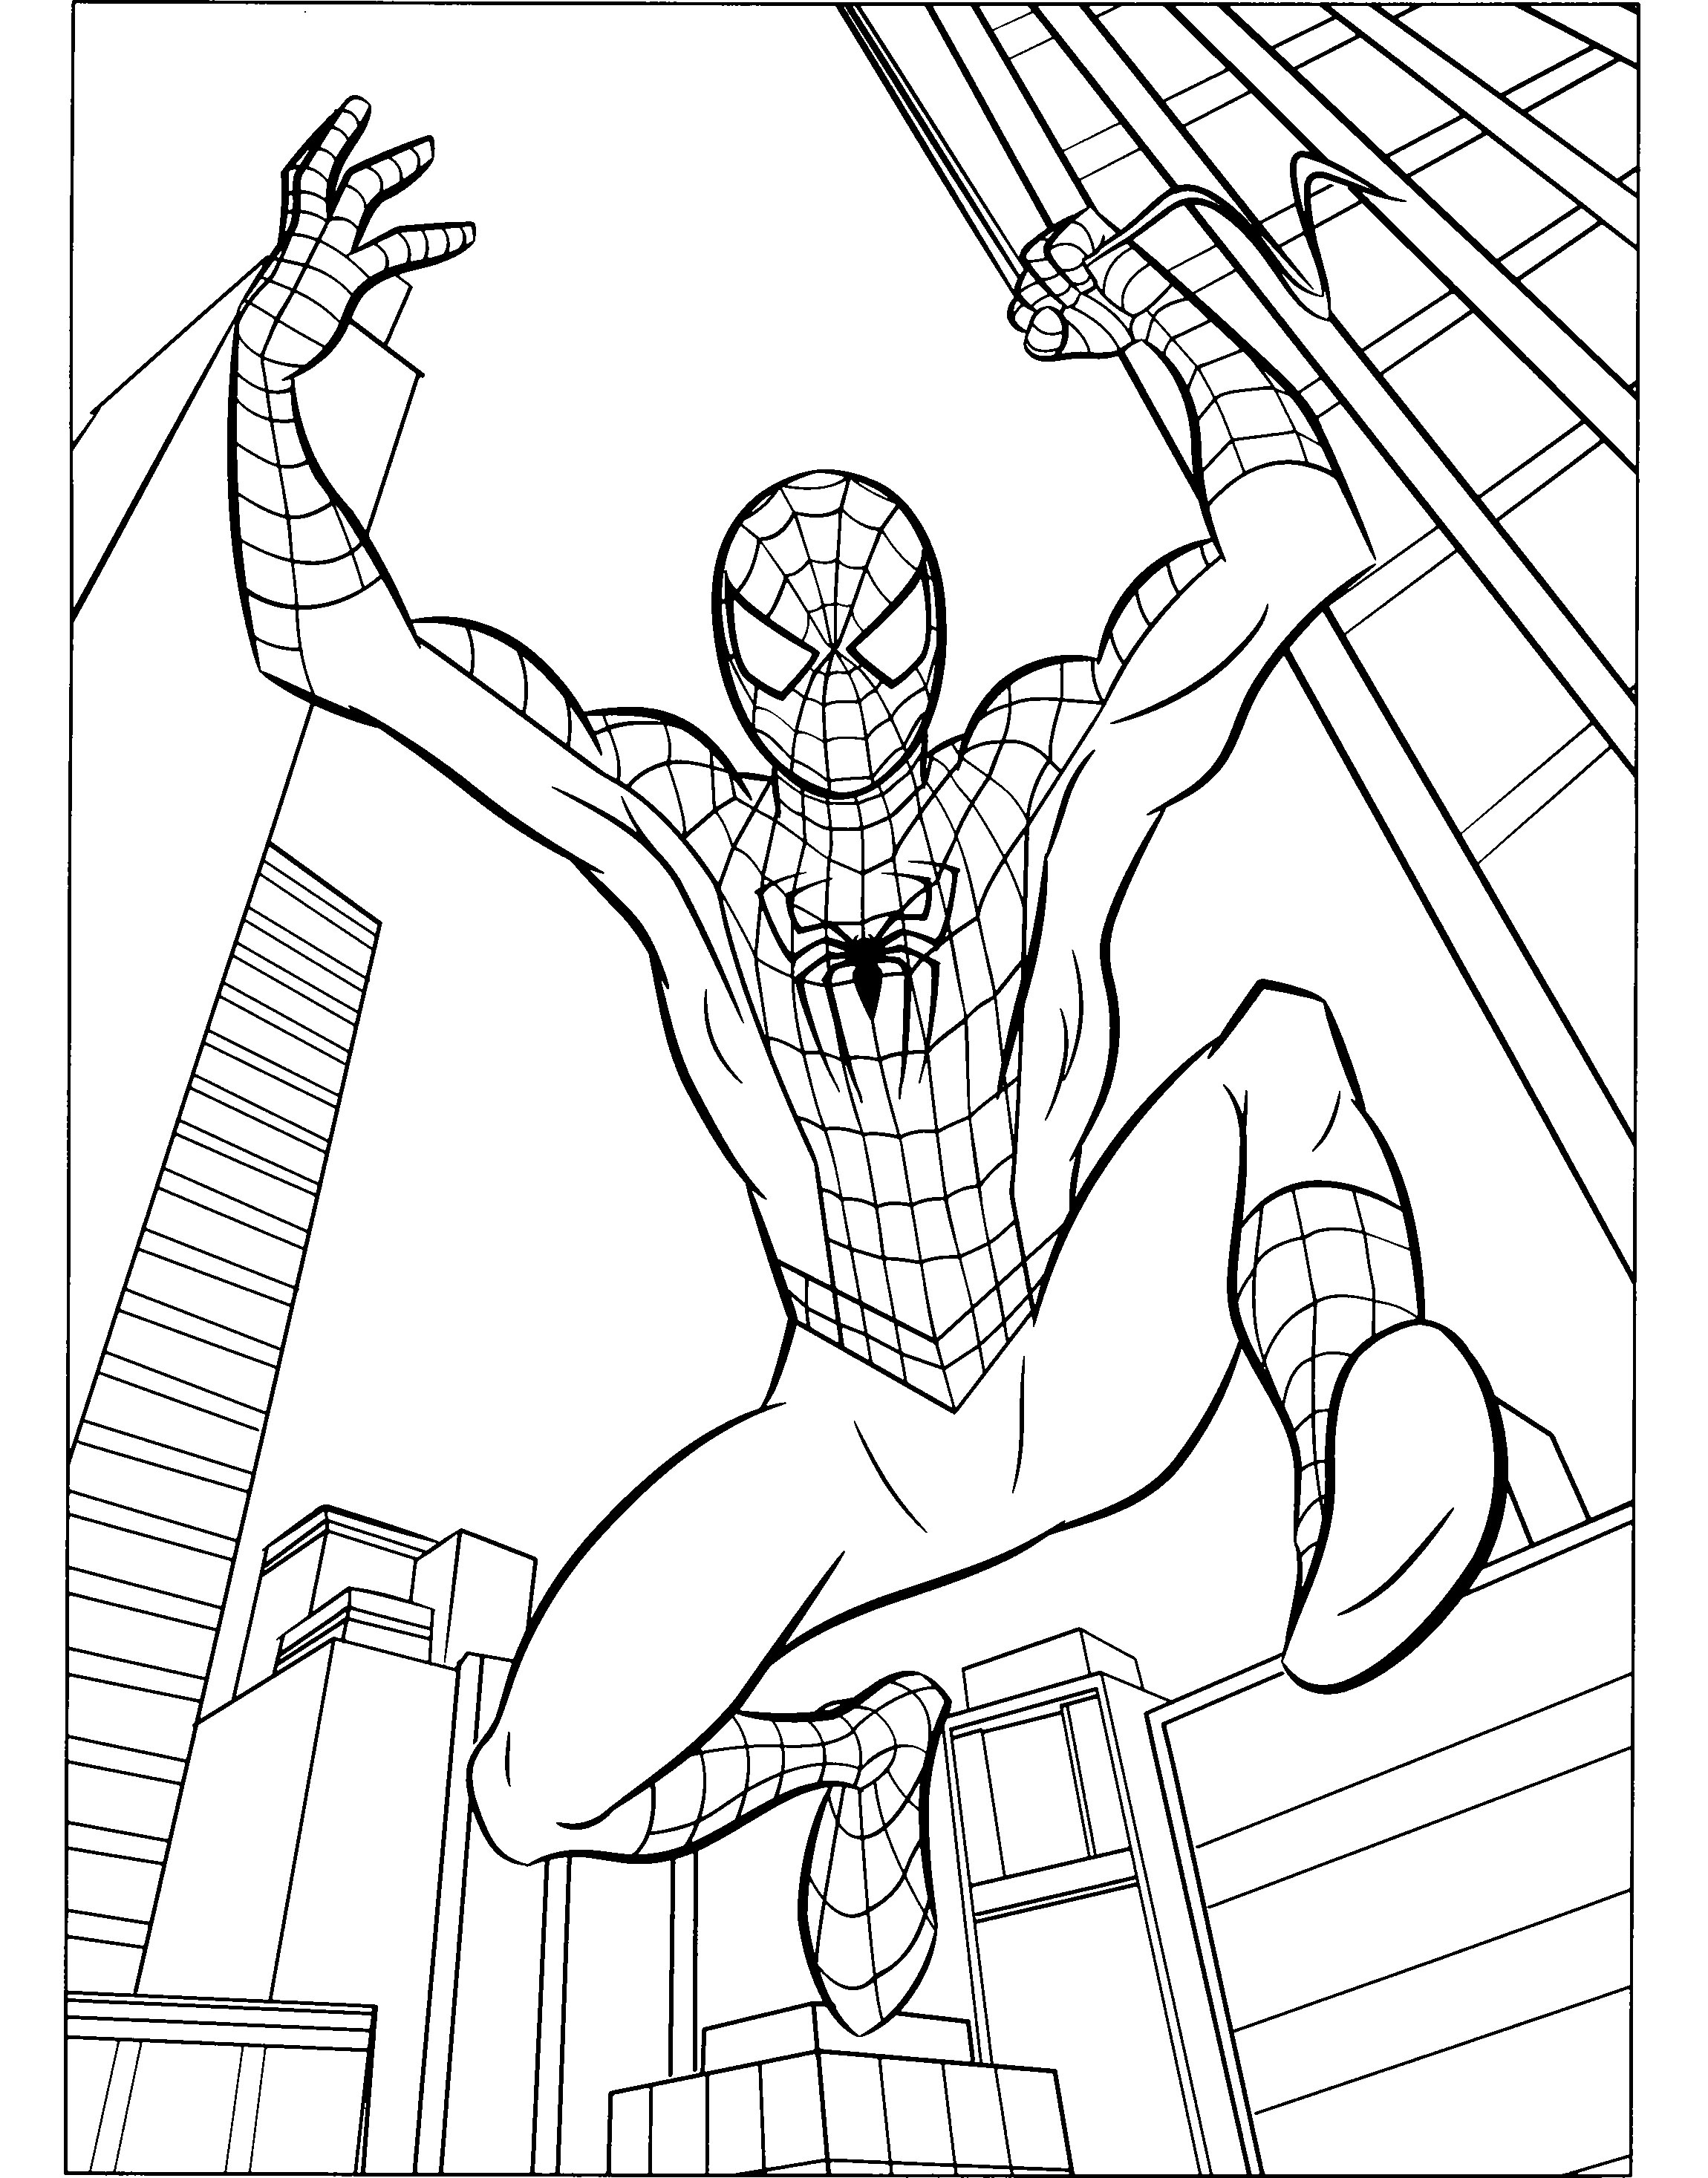 Spiderman Coloring Pages Pdf at Free printable